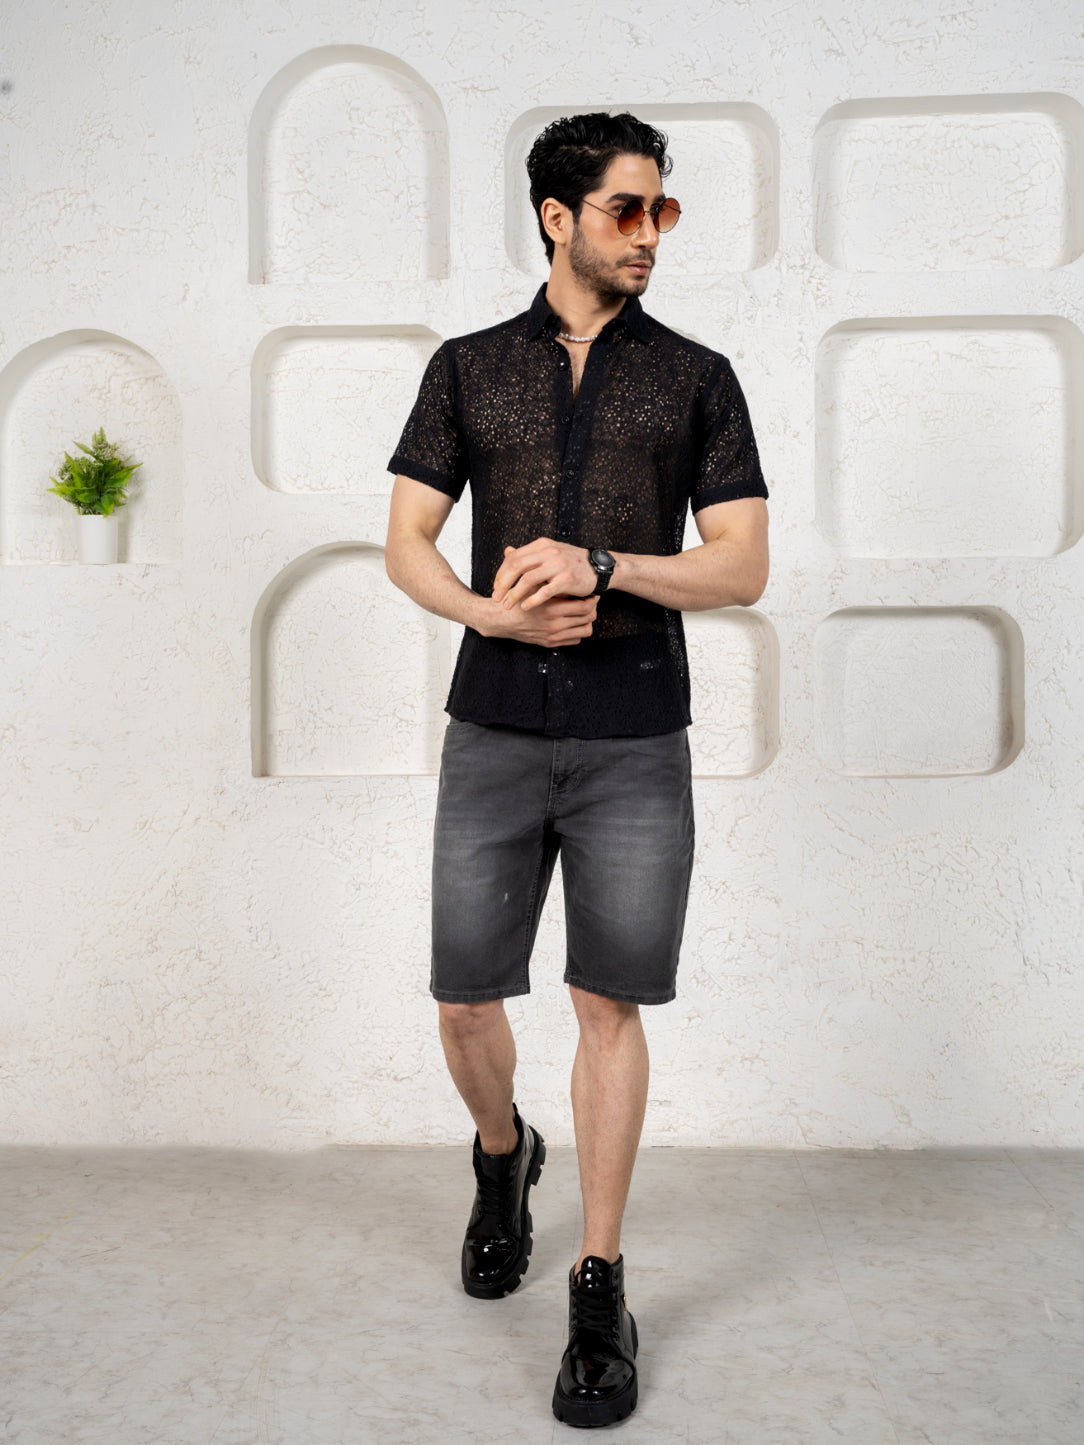 Firangi Yarn Crochet Cotton Jet Black Floral Lace Shirt For Men 2024 - Half Sleeves (Take One Size Bigger Than Your Usual Size)